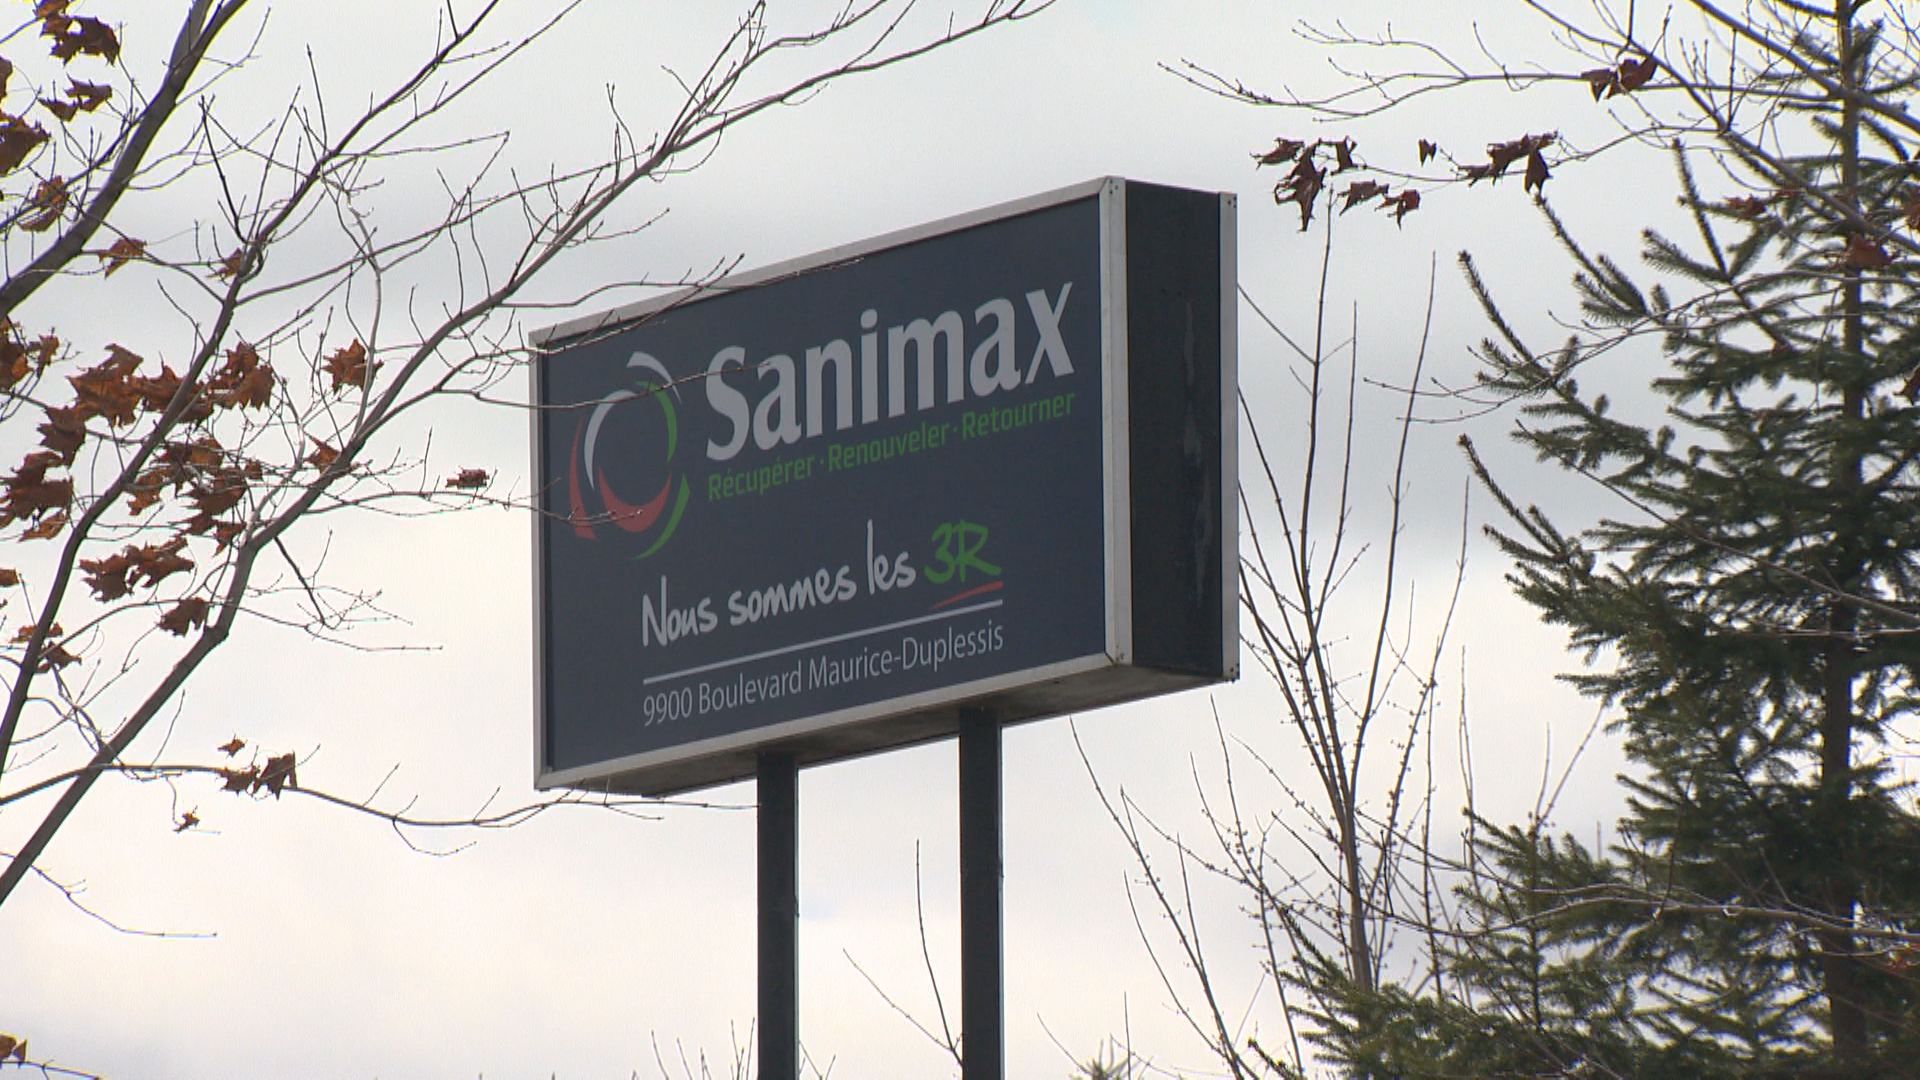 Sanimax strikes deal with government to put end to foul smells in Rivière-des-Prairies